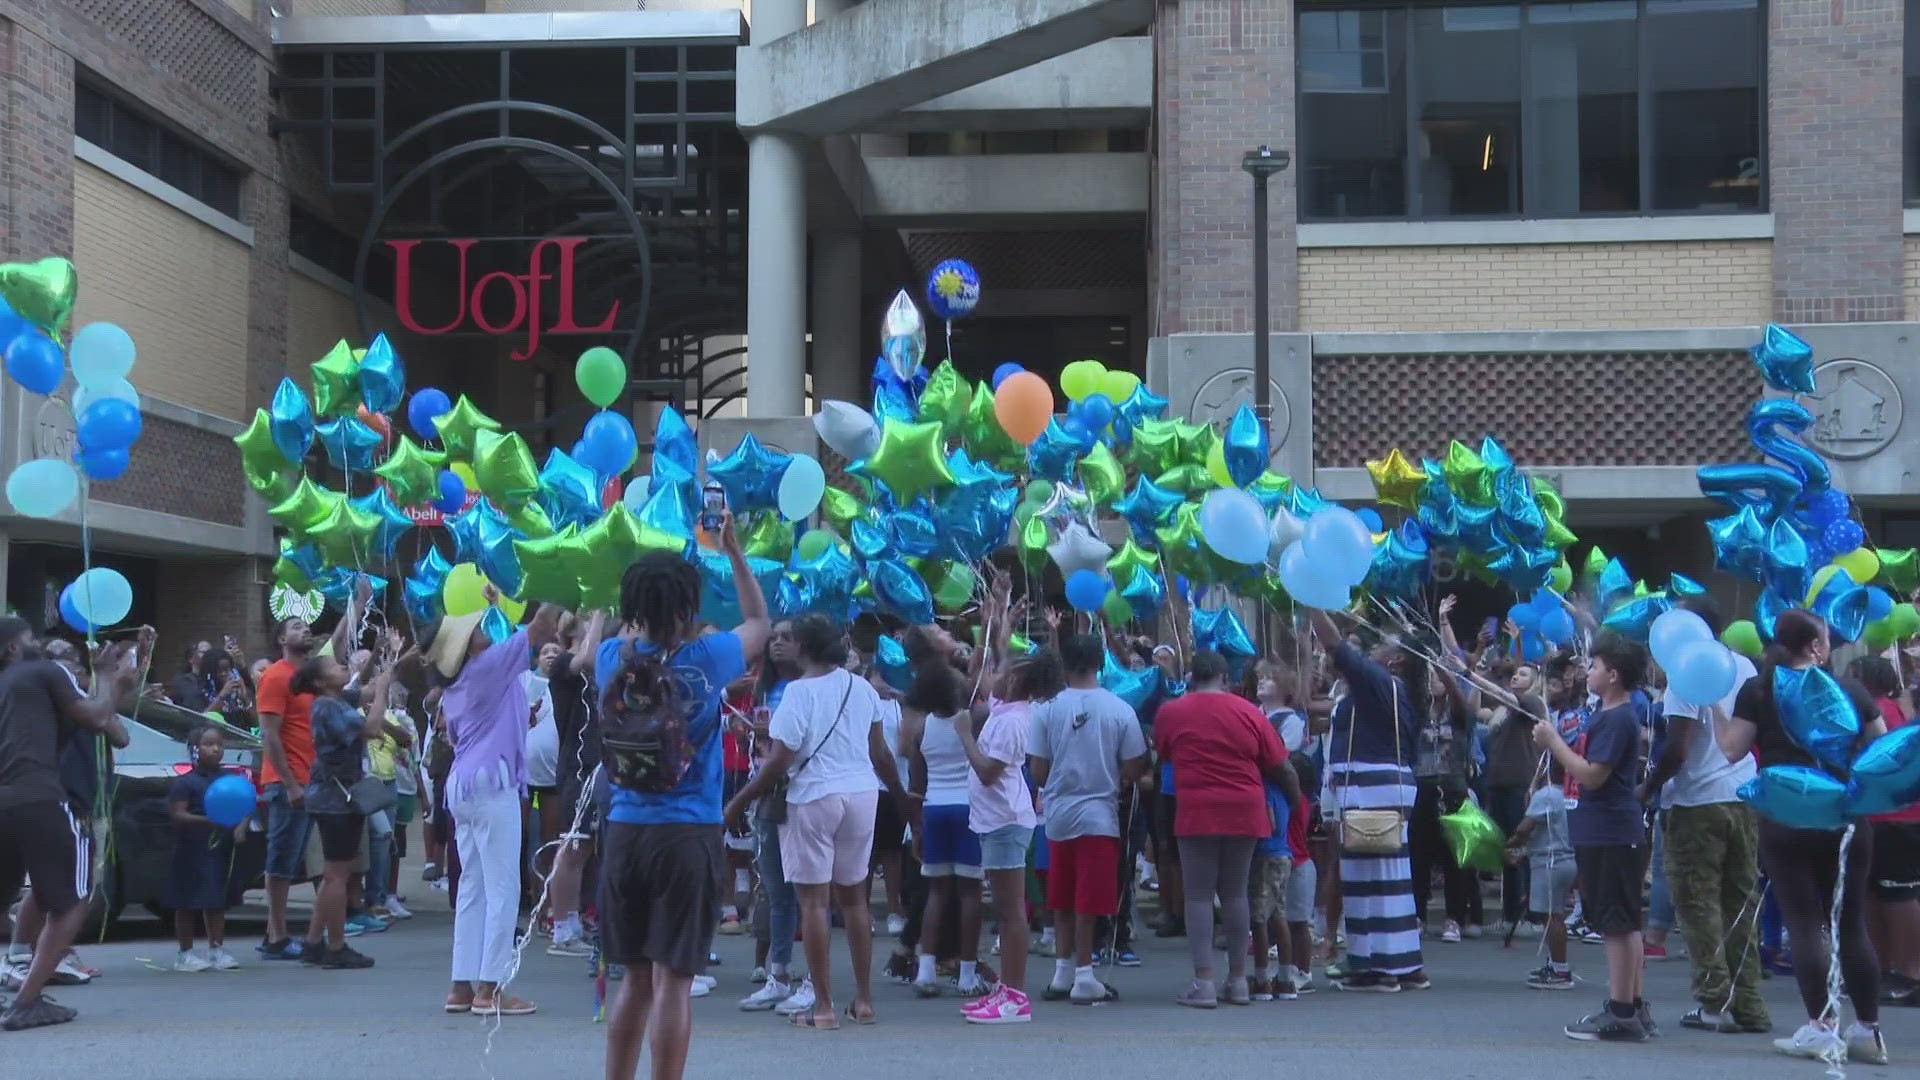 The Future Healers gathered outside Norton Children's Hospital to uplift 11-year-old Keeland Sanders and his family.